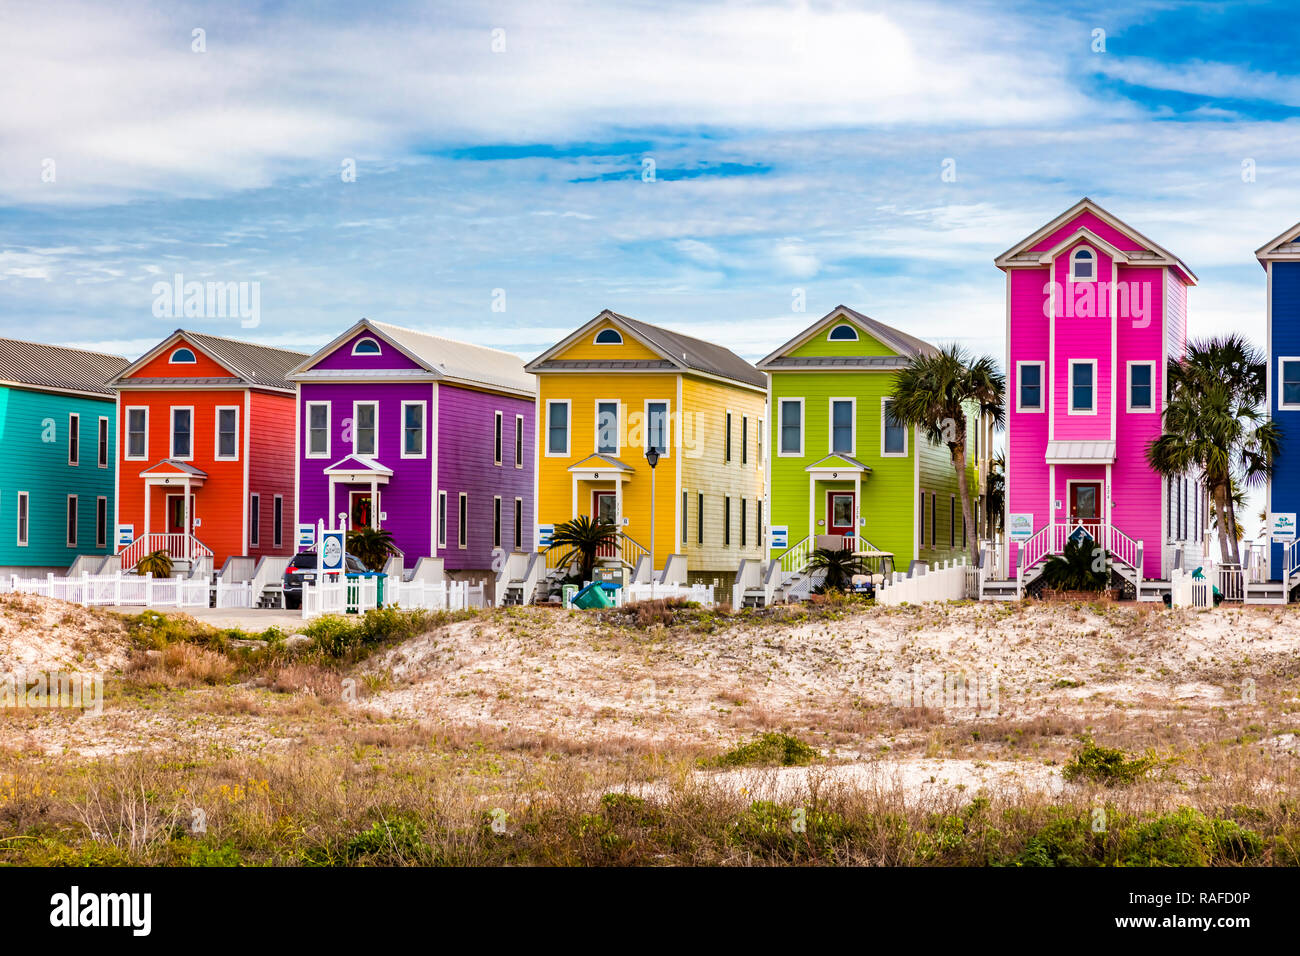 Colotful beach houses on St George Island in the panhandle or forgotten coast area of Florida in the United States Stock Photo